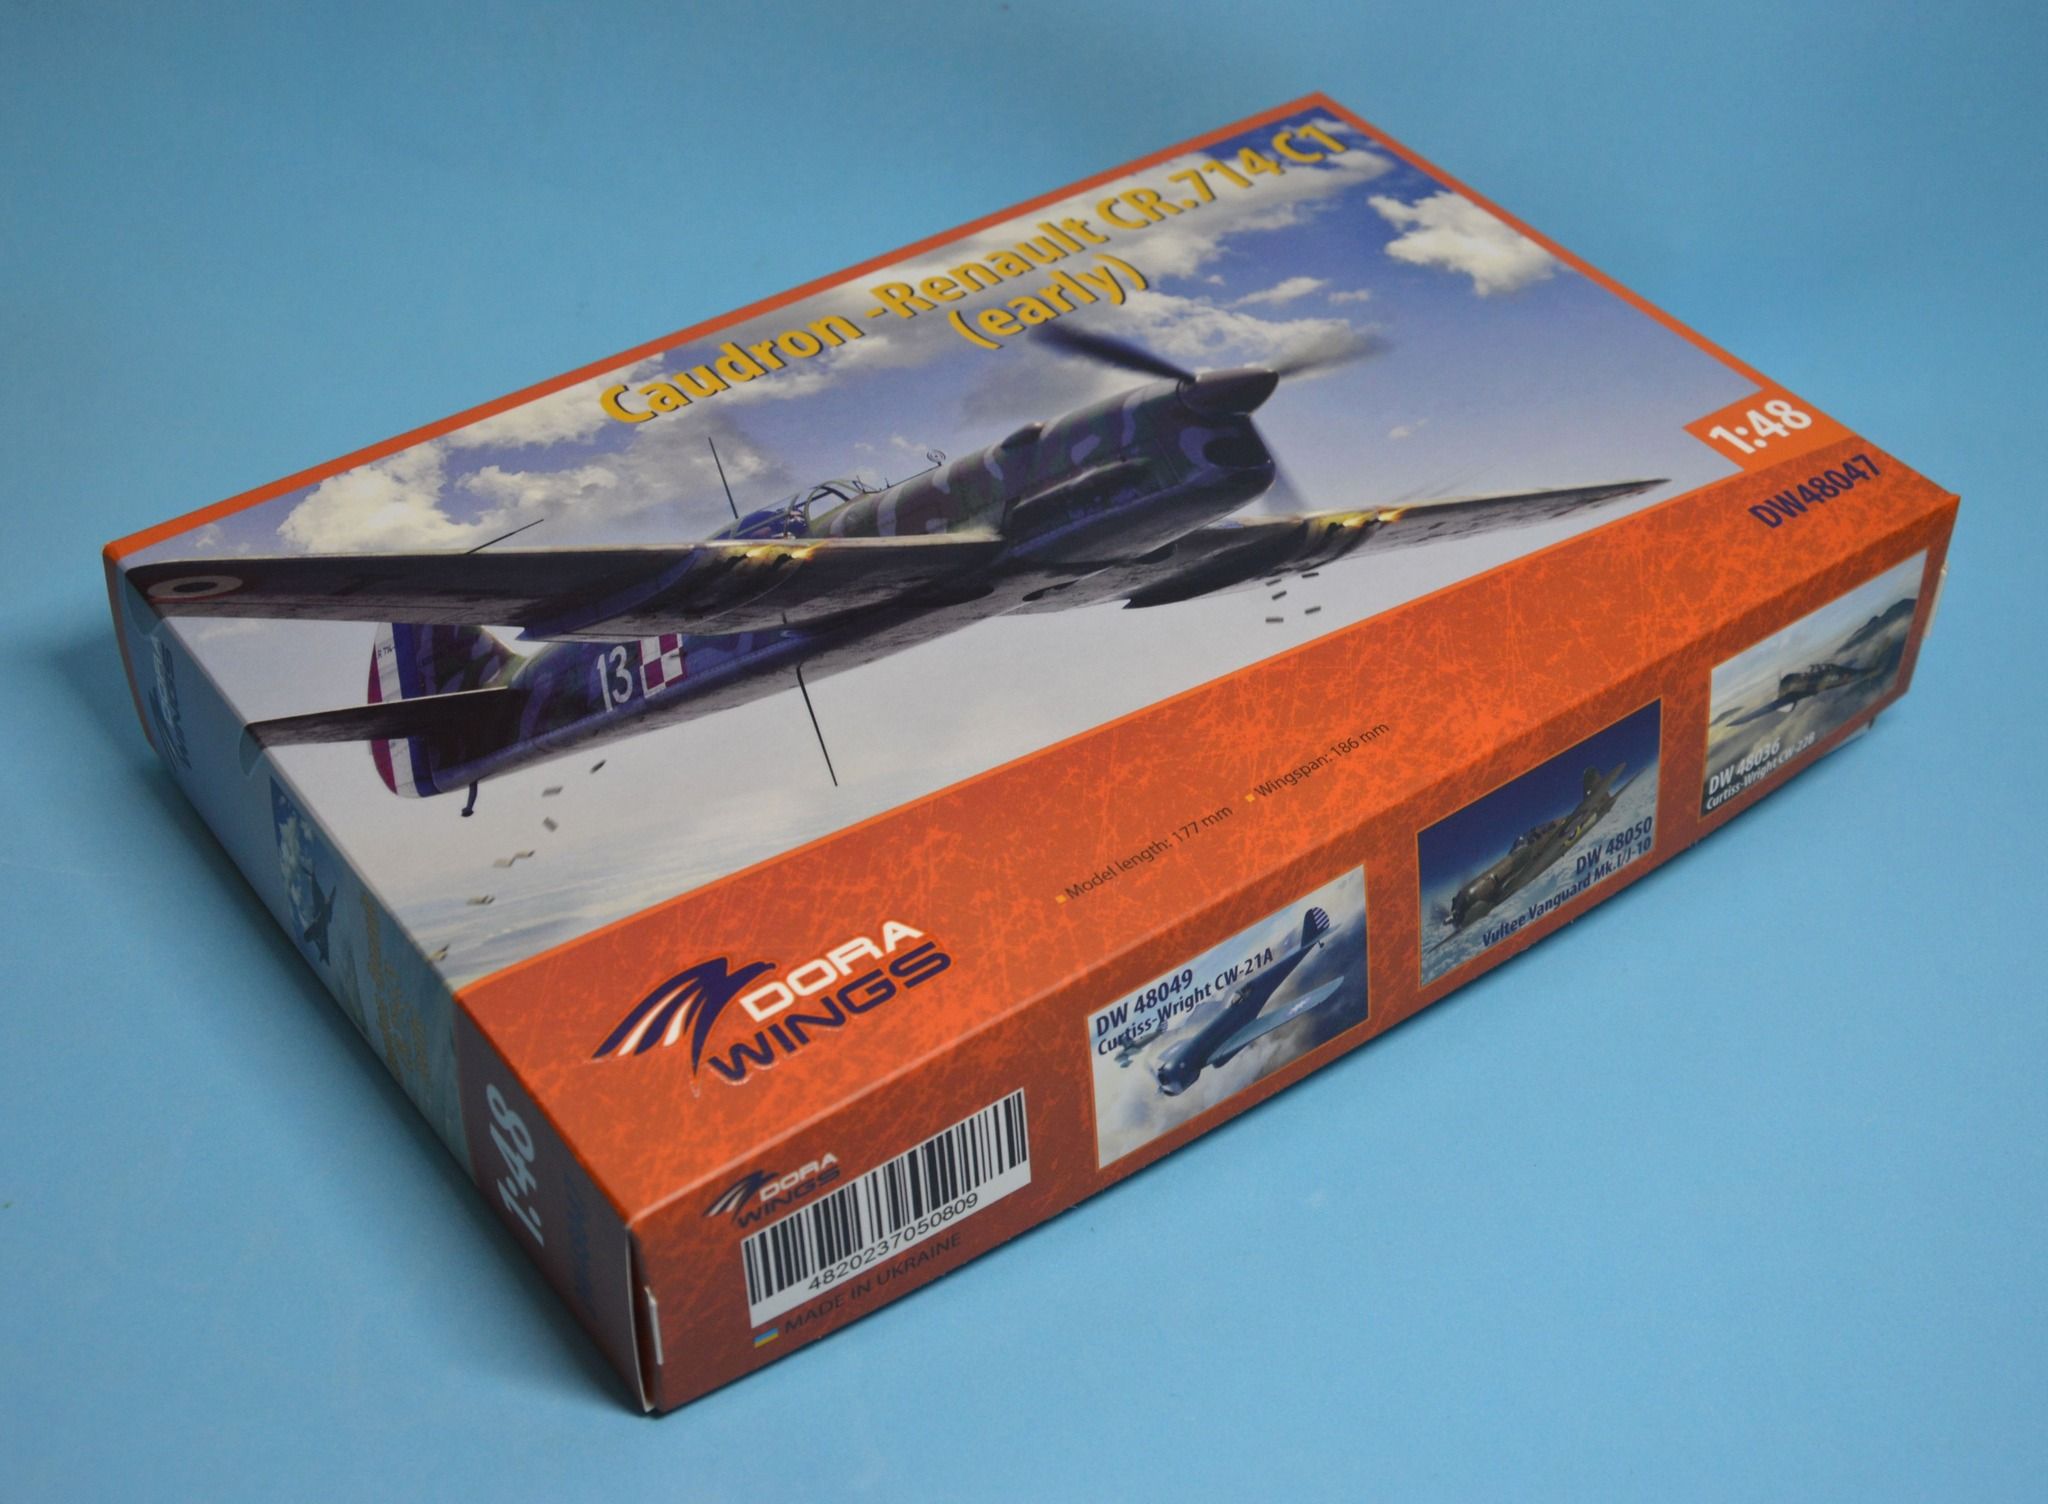 DoraWings DW48047 - Caudron-Renault CR.714 С1 (early) - 1/48 - Scale model